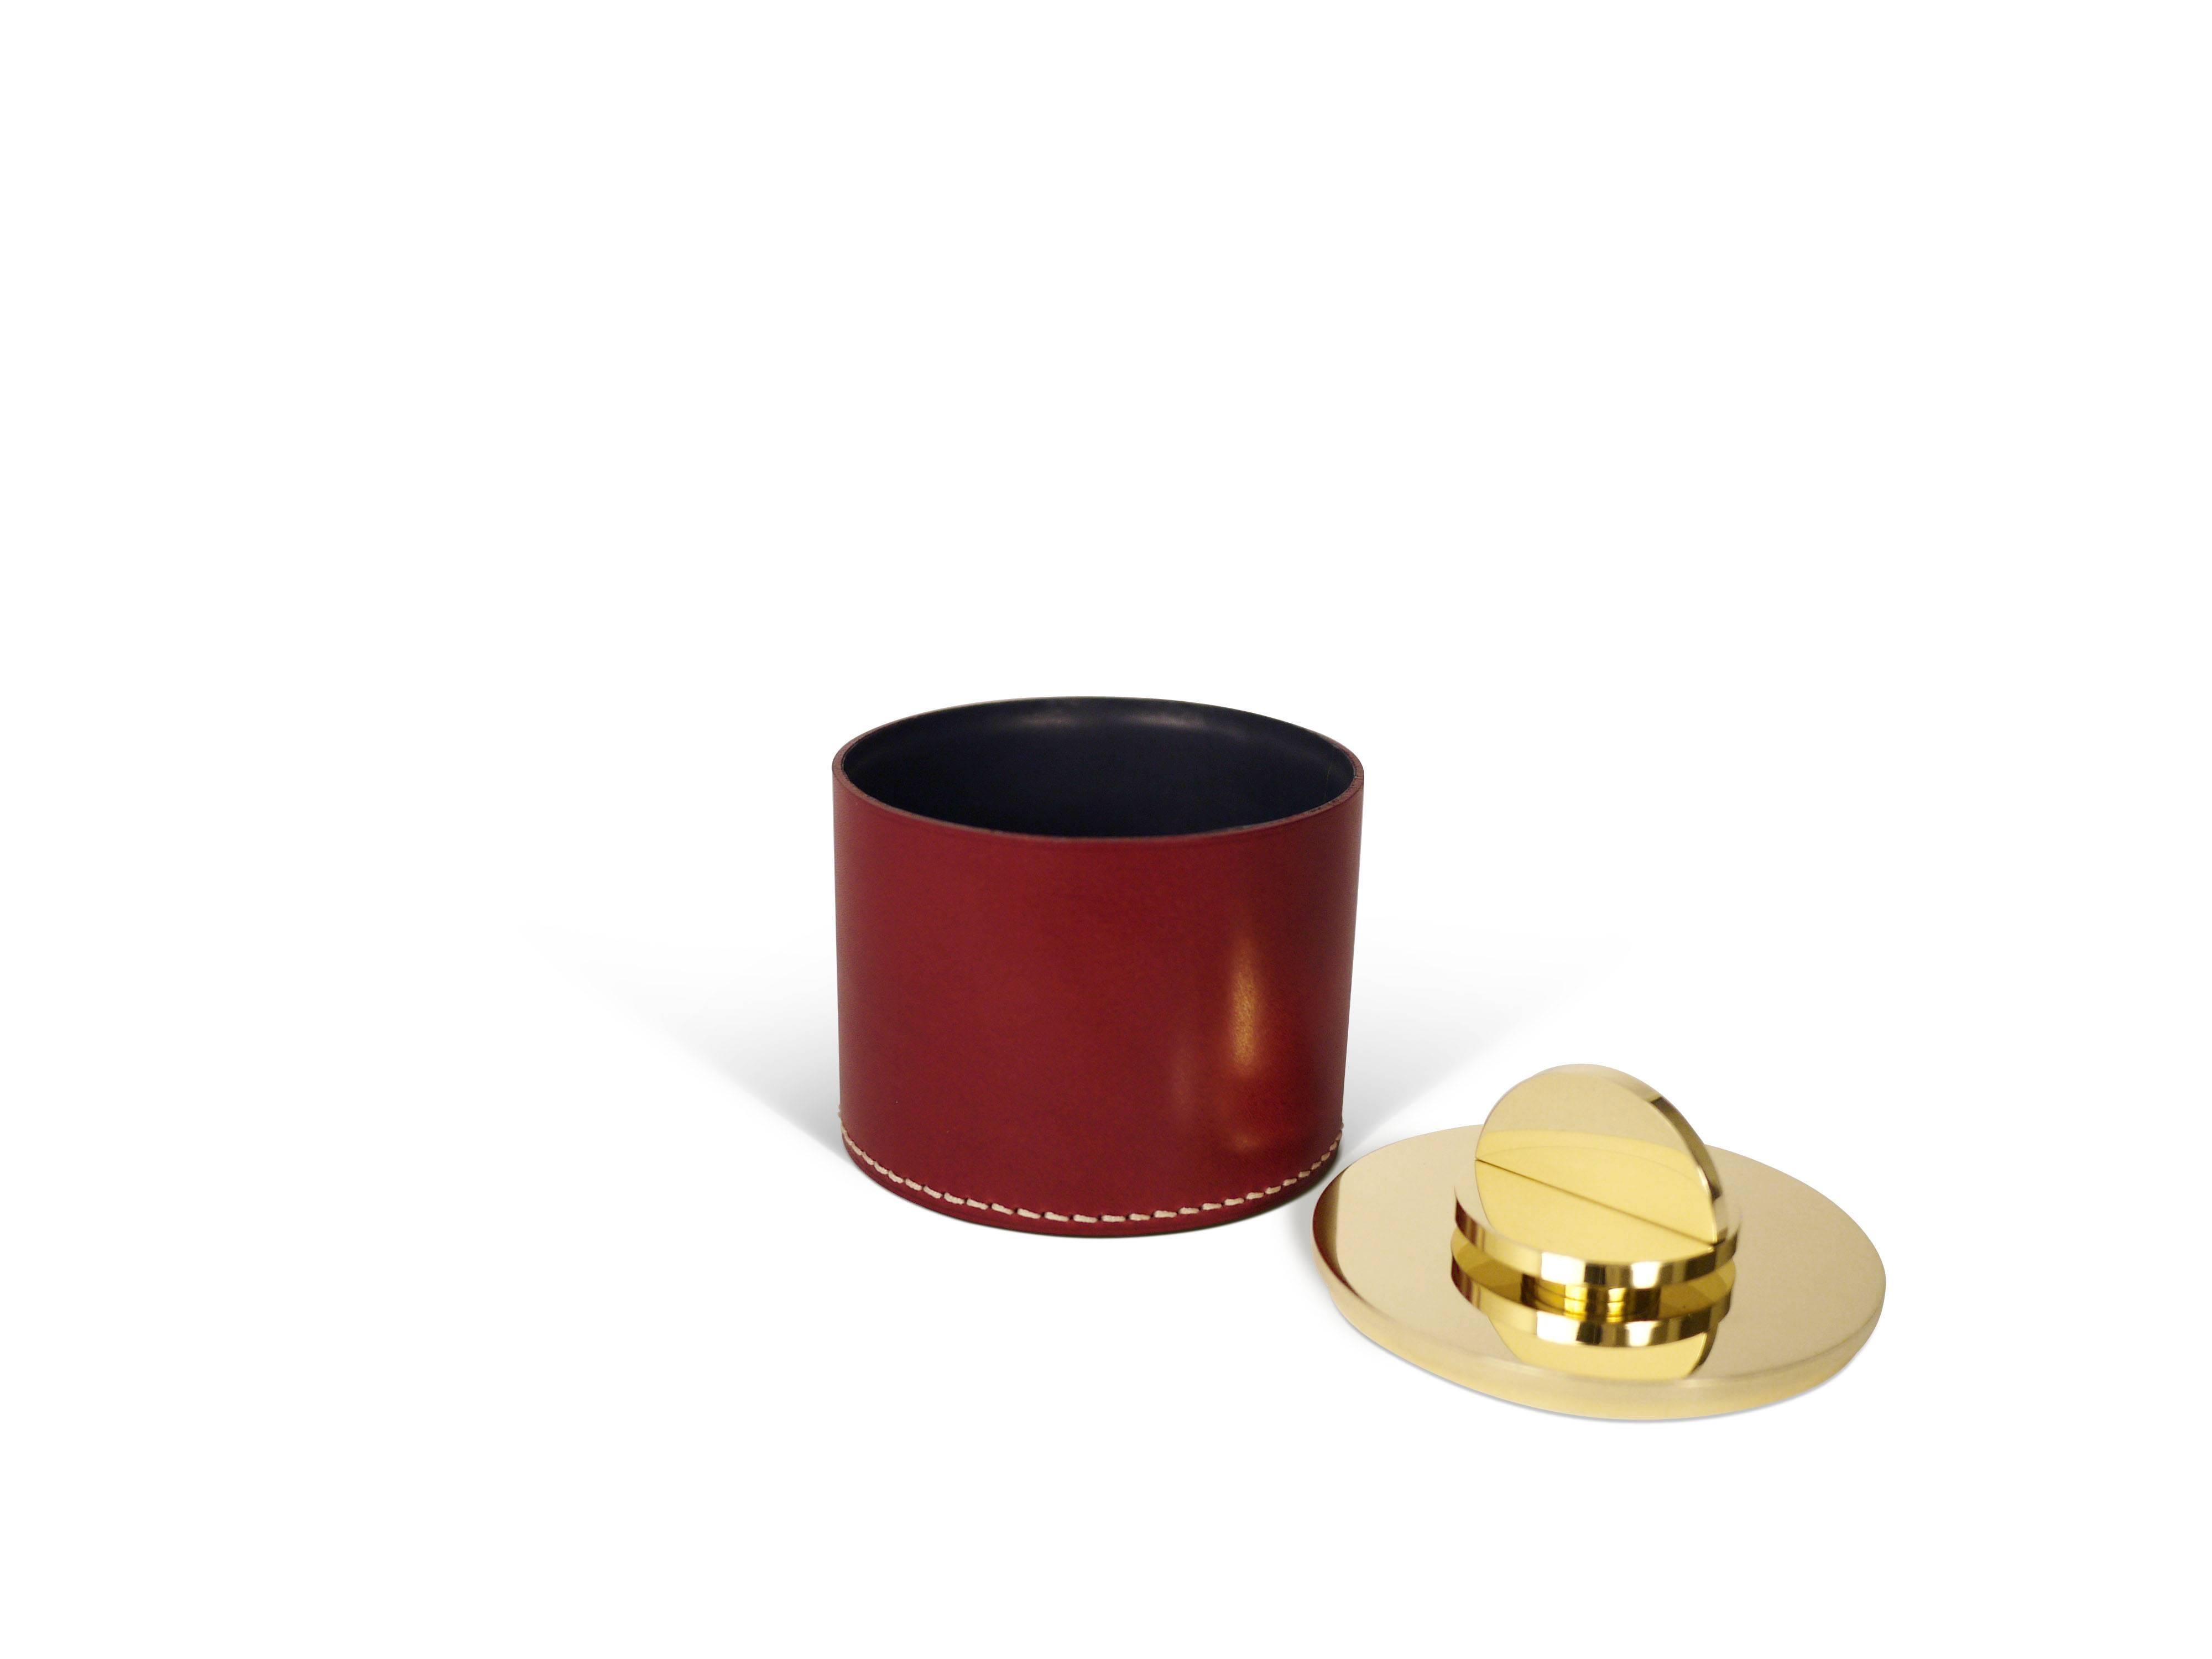 Part of Les Few's Armance collection, this contemporary, burgundy, round, leather and brass, modern, Minimalist box is made by artisans in Sweden. The interior leather comes in either anthracite gray or navy. The brass is solid Swedish brass and the